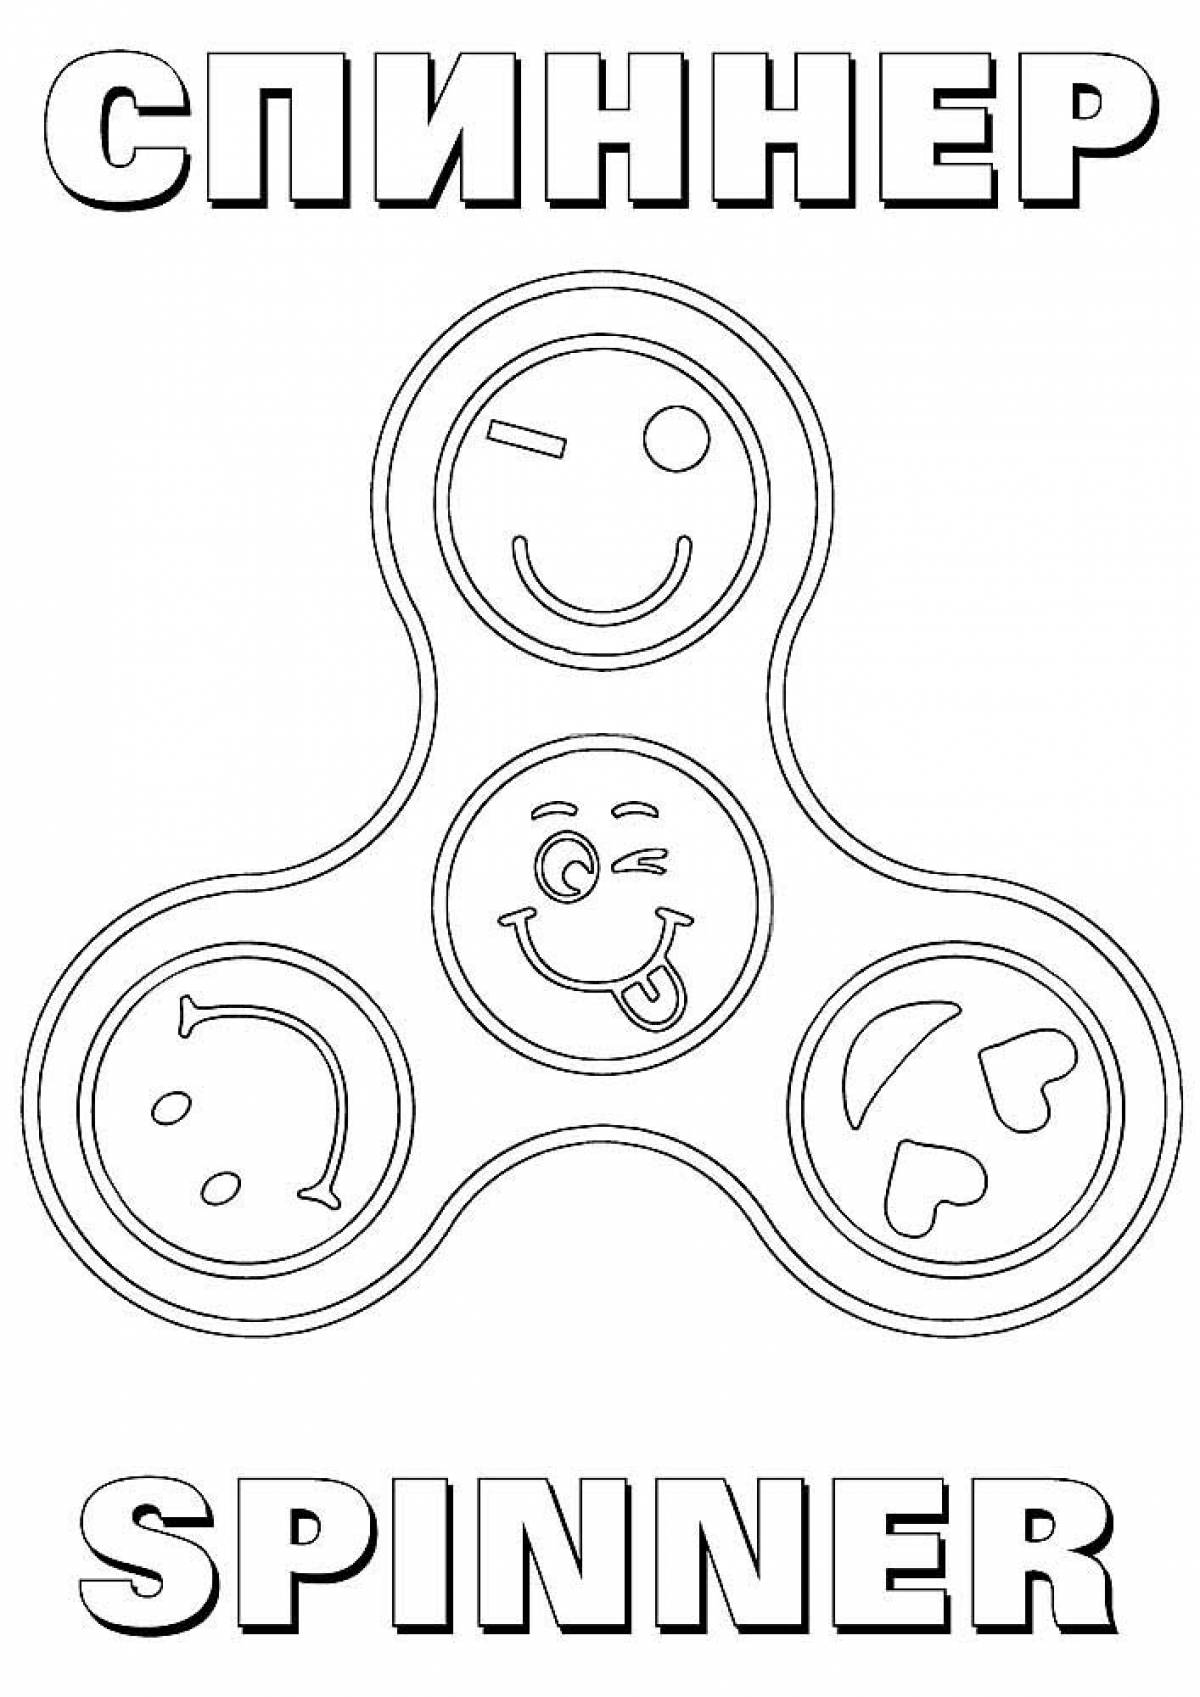 Spinner coloring page